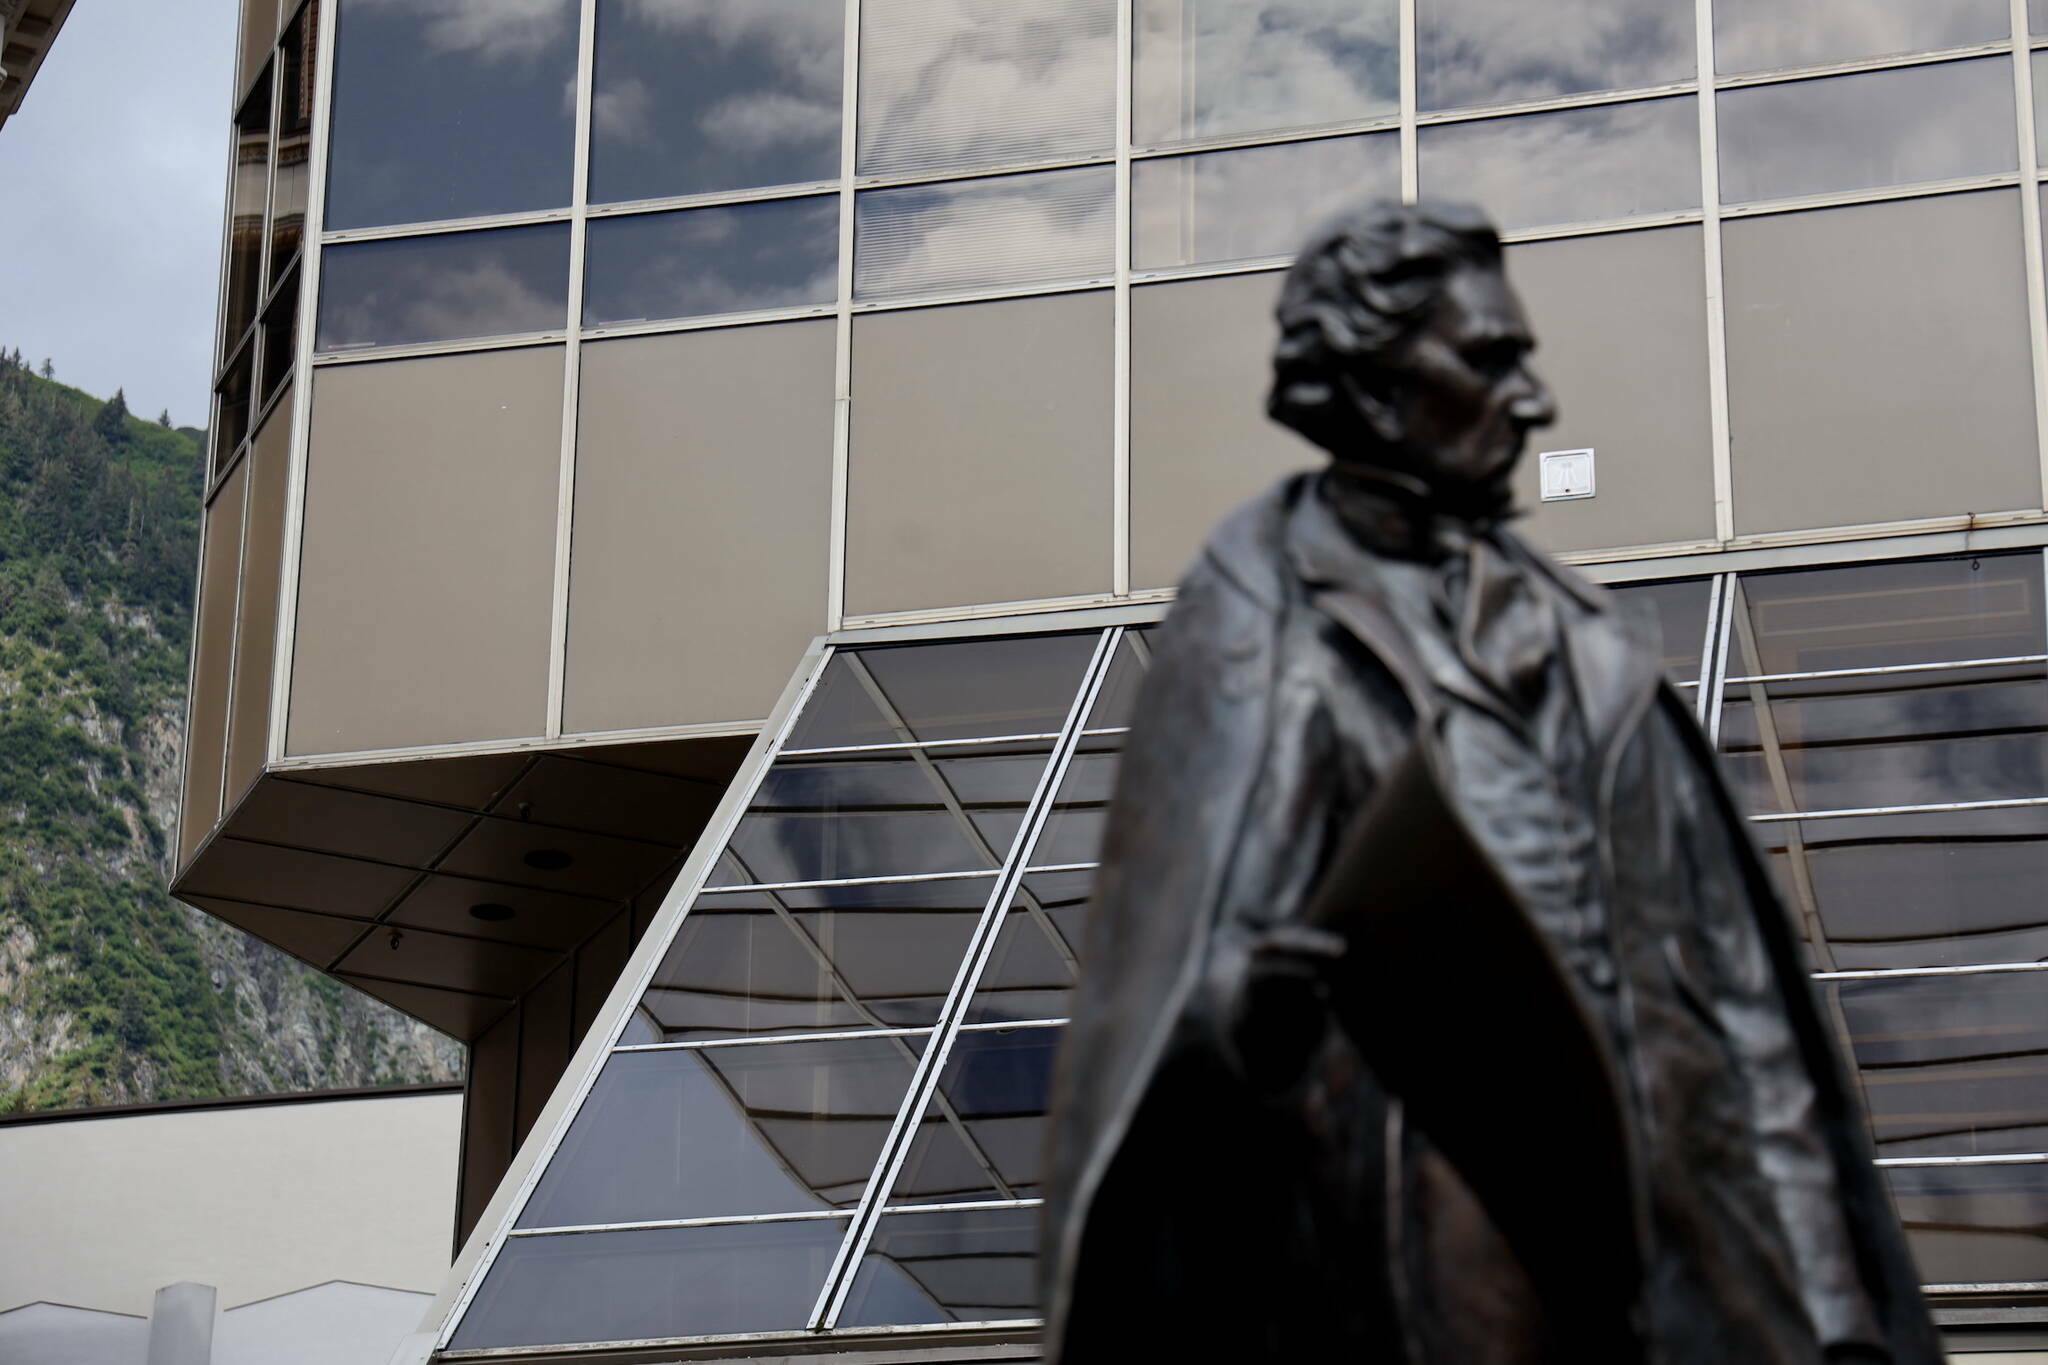 A statue of William Henry Seward stands outside the Dimond Courthouse in downtown Juneau. (Clarise Larson / Juneau Empire file photo)